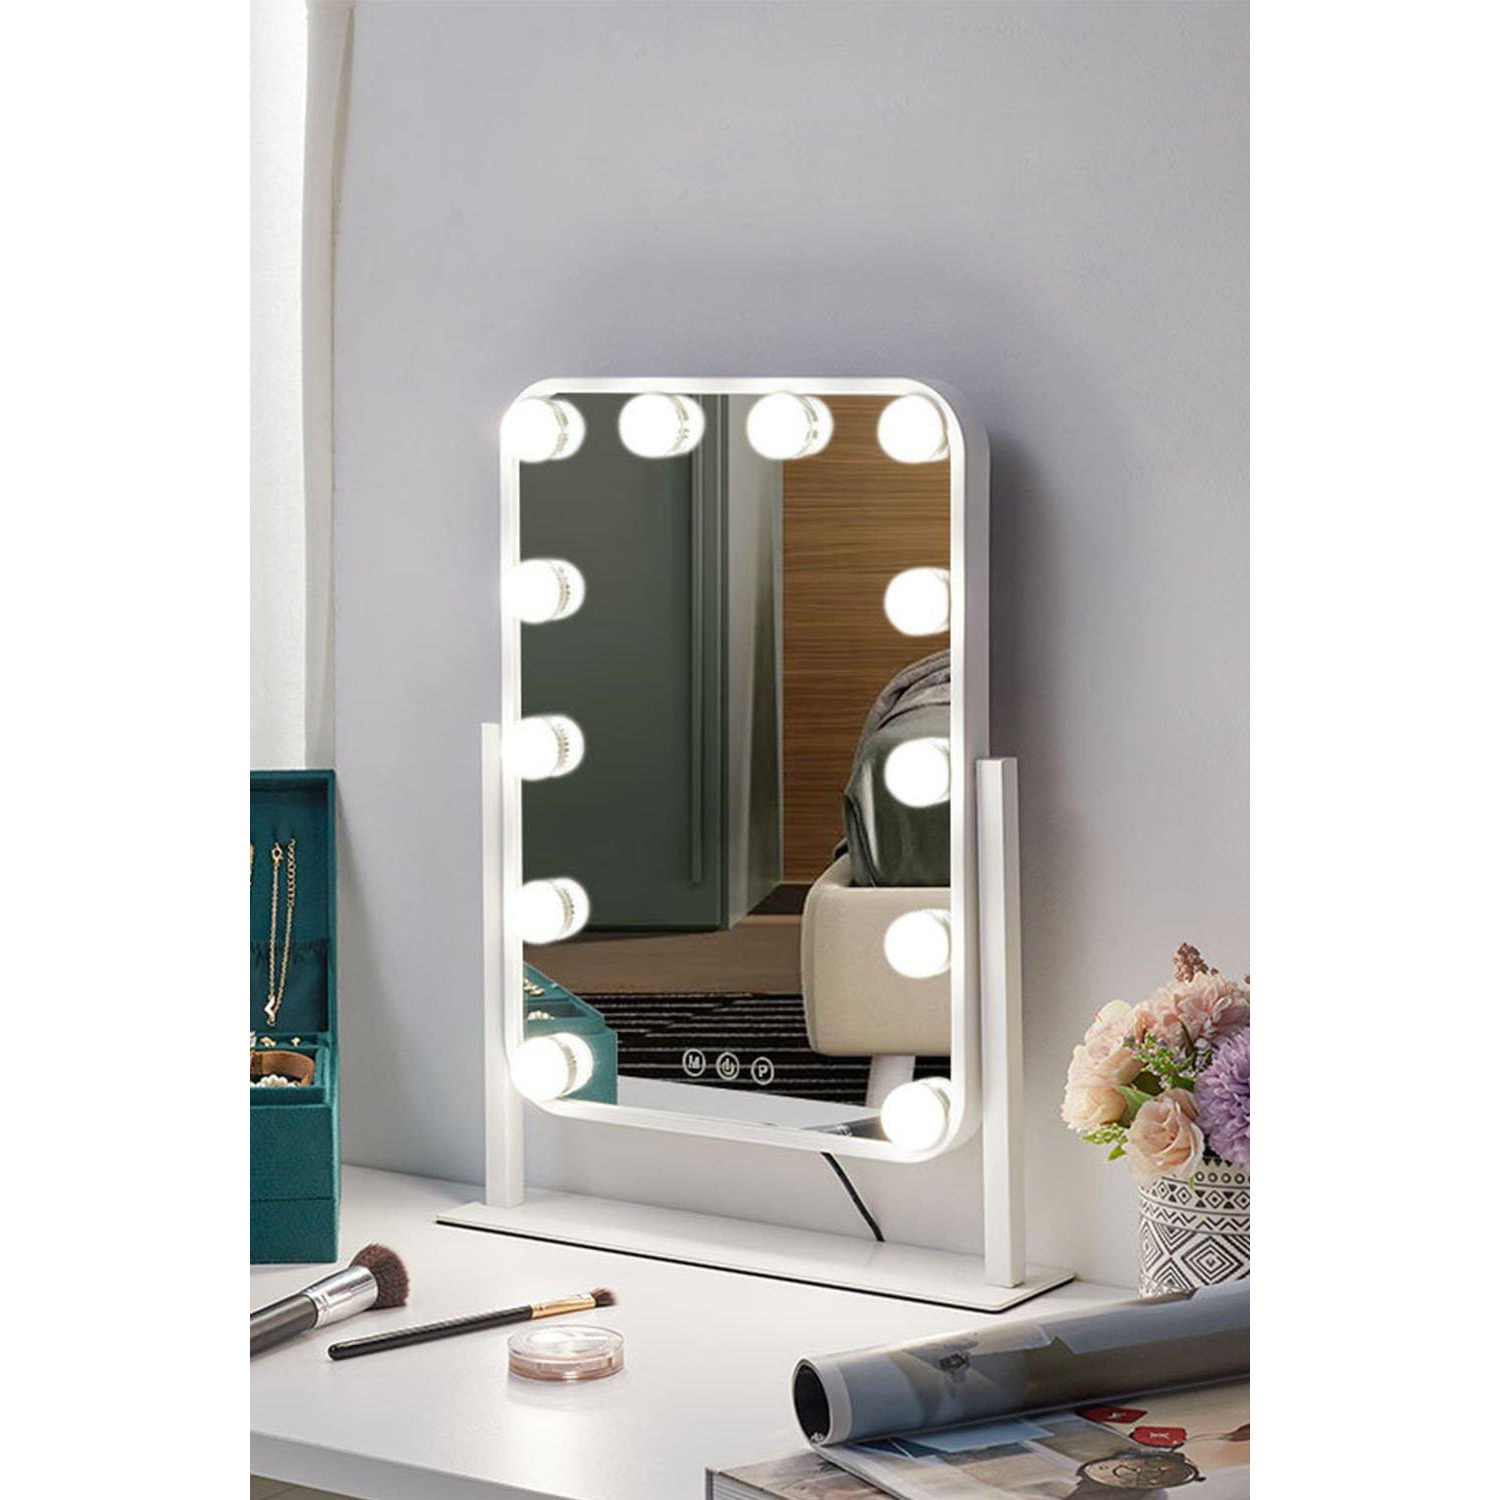 Adjustable Angle  Hollywood LED Makeup Mirror With 3 Color Light - image 1